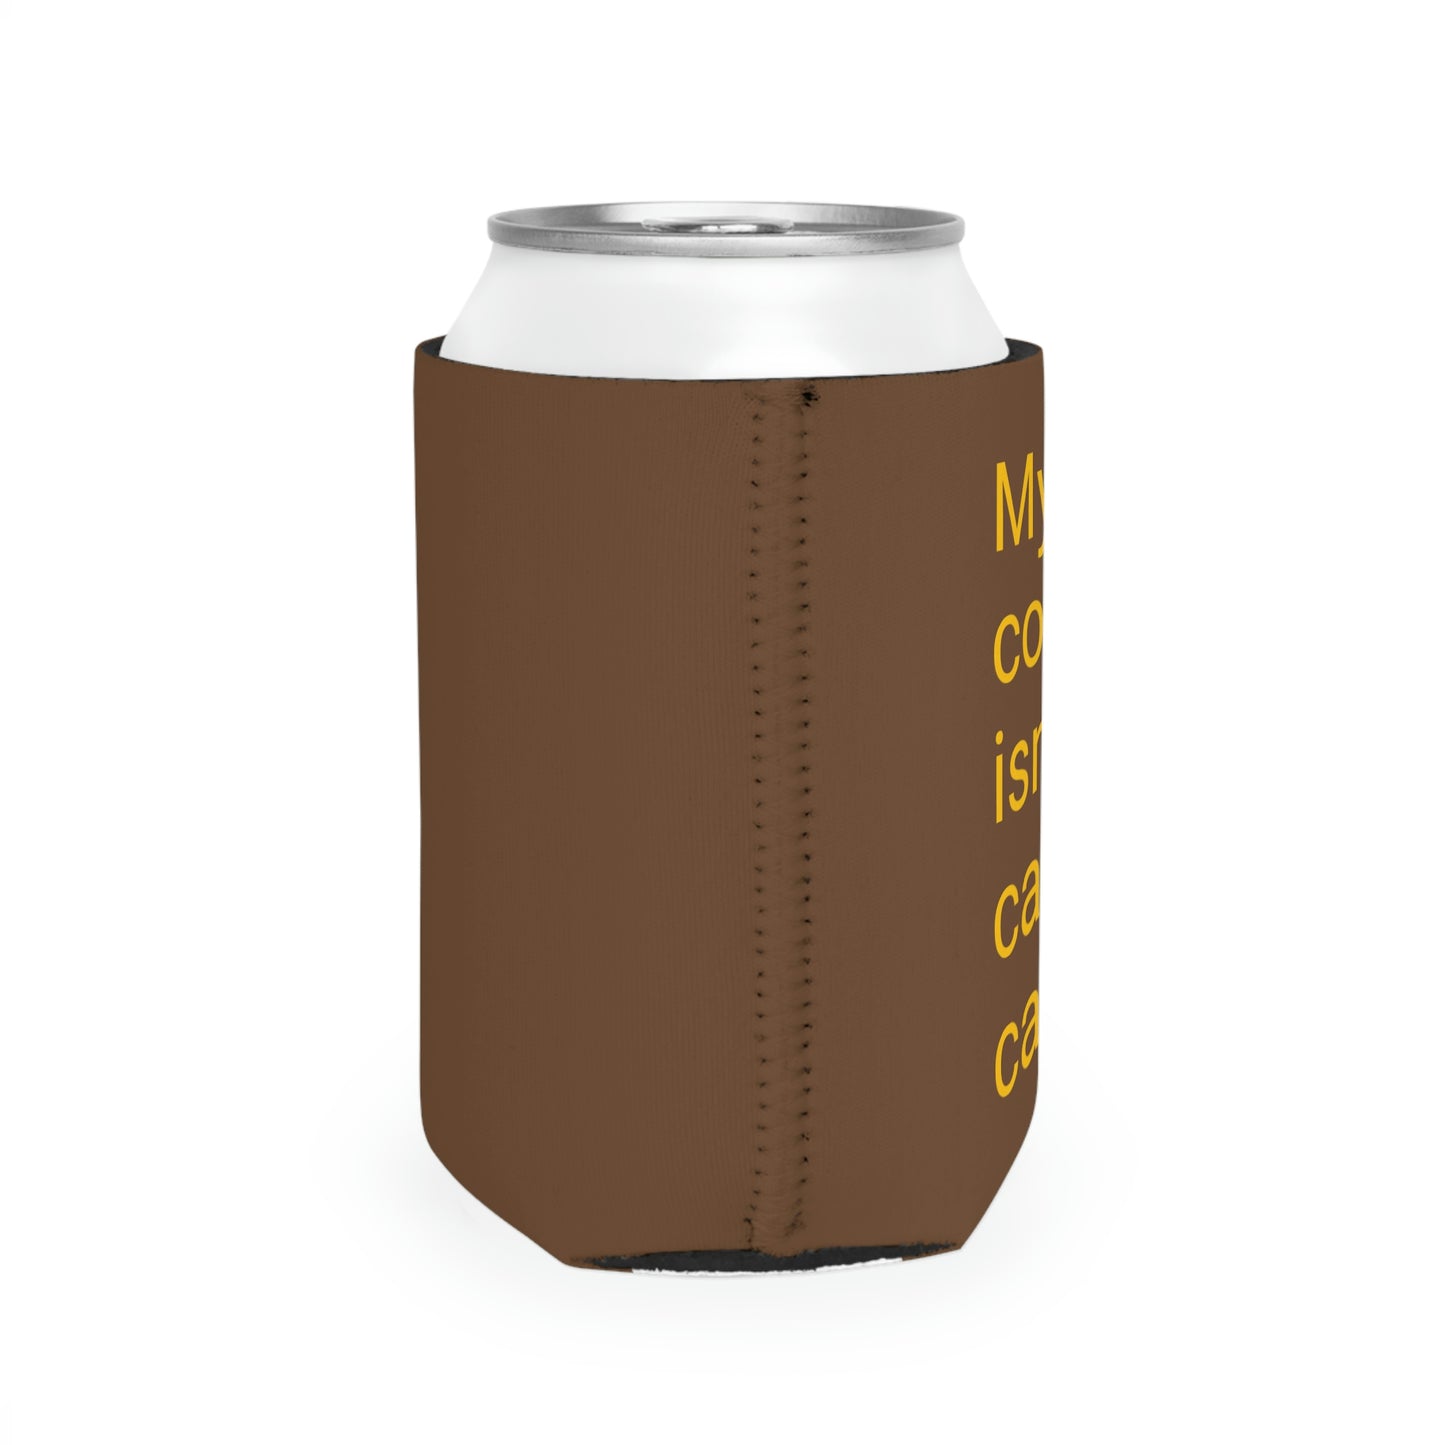 Can't Coffee Can Cooler Sleeve